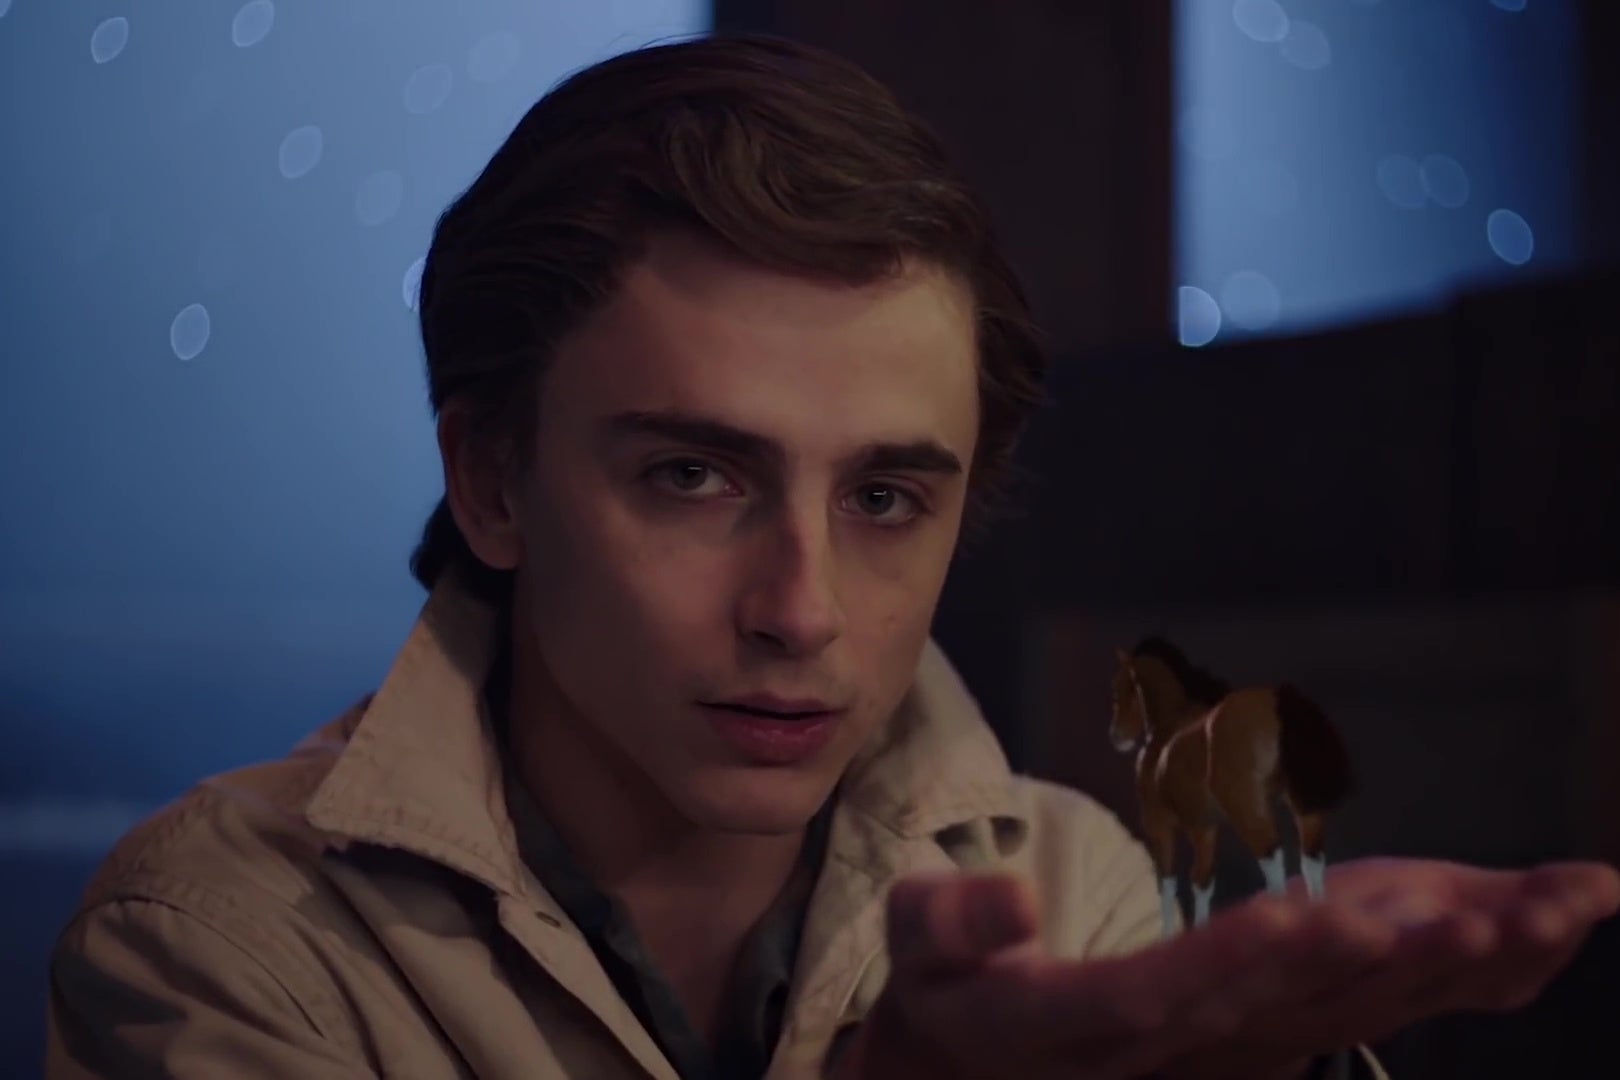 Timothee Chalamet, dressed as a cowboy, holds a tiny claymation horse in the palm of his hand.